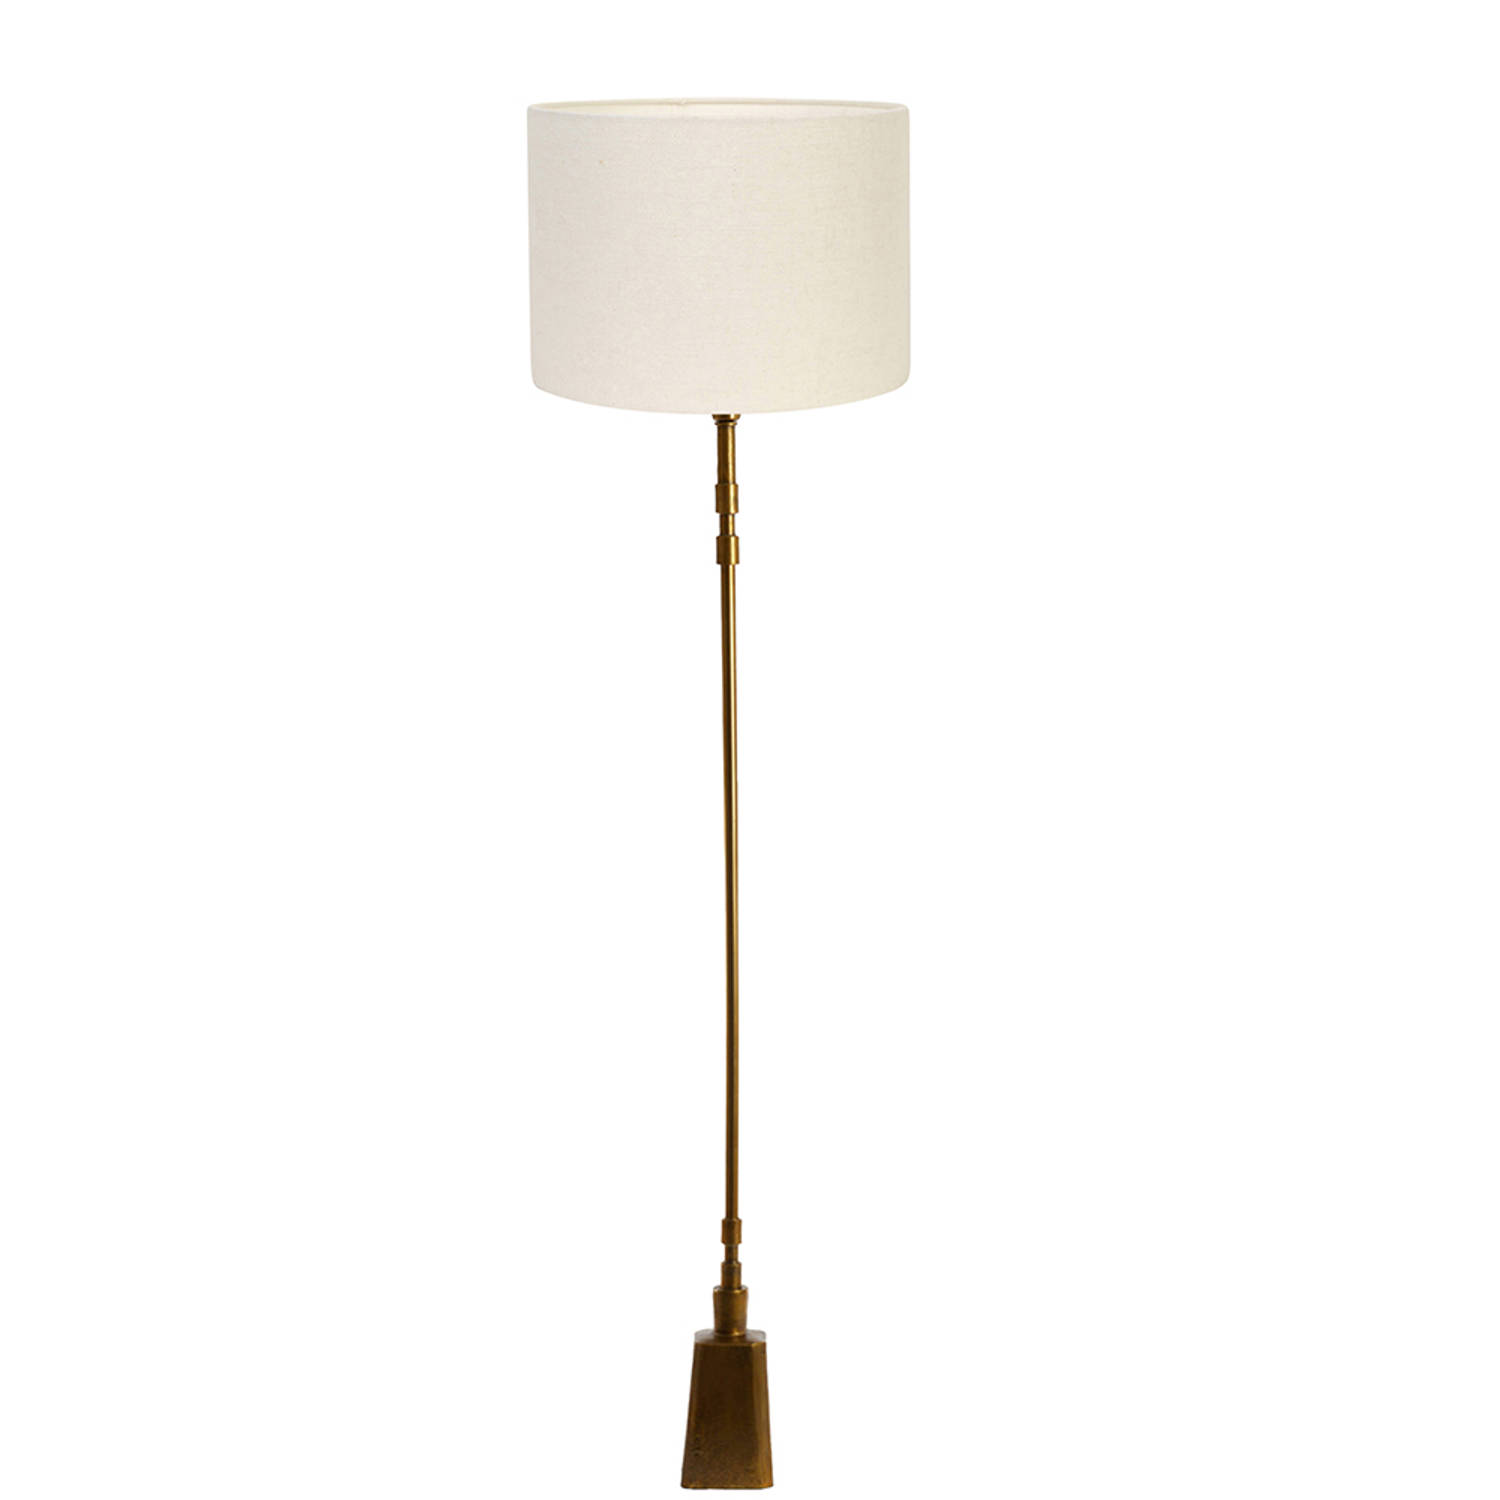 Light and Living Donah vloerlamp - Ø 50 cm - E27 (grote fitting) - wit